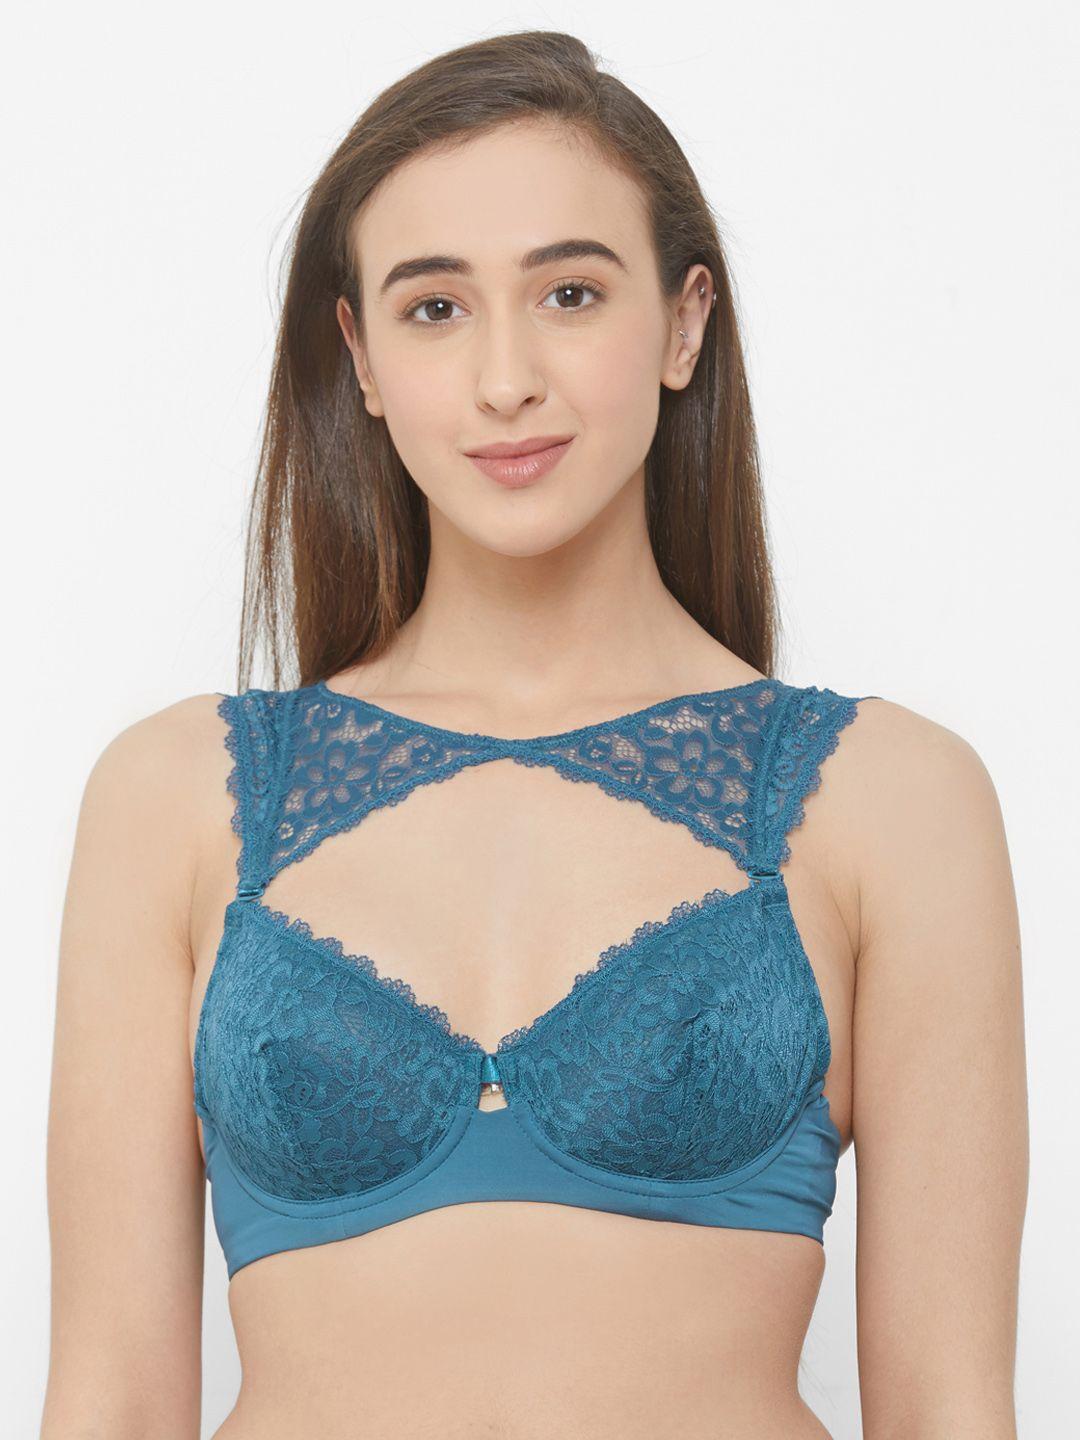 soie-teal-blue-lace-underwired-demi-cup-non-padded-balconette-bra